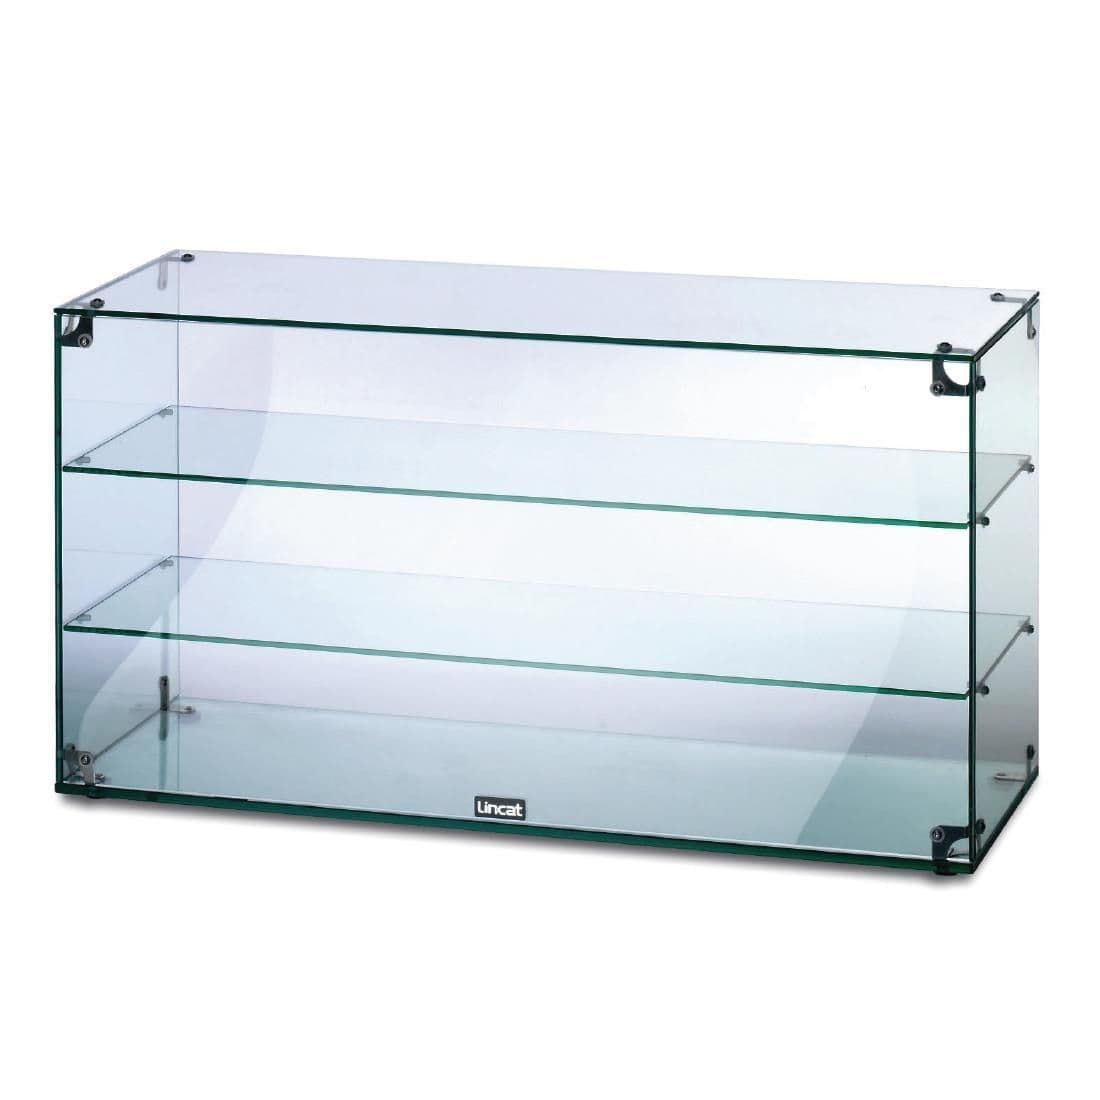 GC39 - Lincat Seal Counter-top Glass Display Case - Open Back - W 907 mm - GJ721 JD Catering Equipment Solutions Ltd